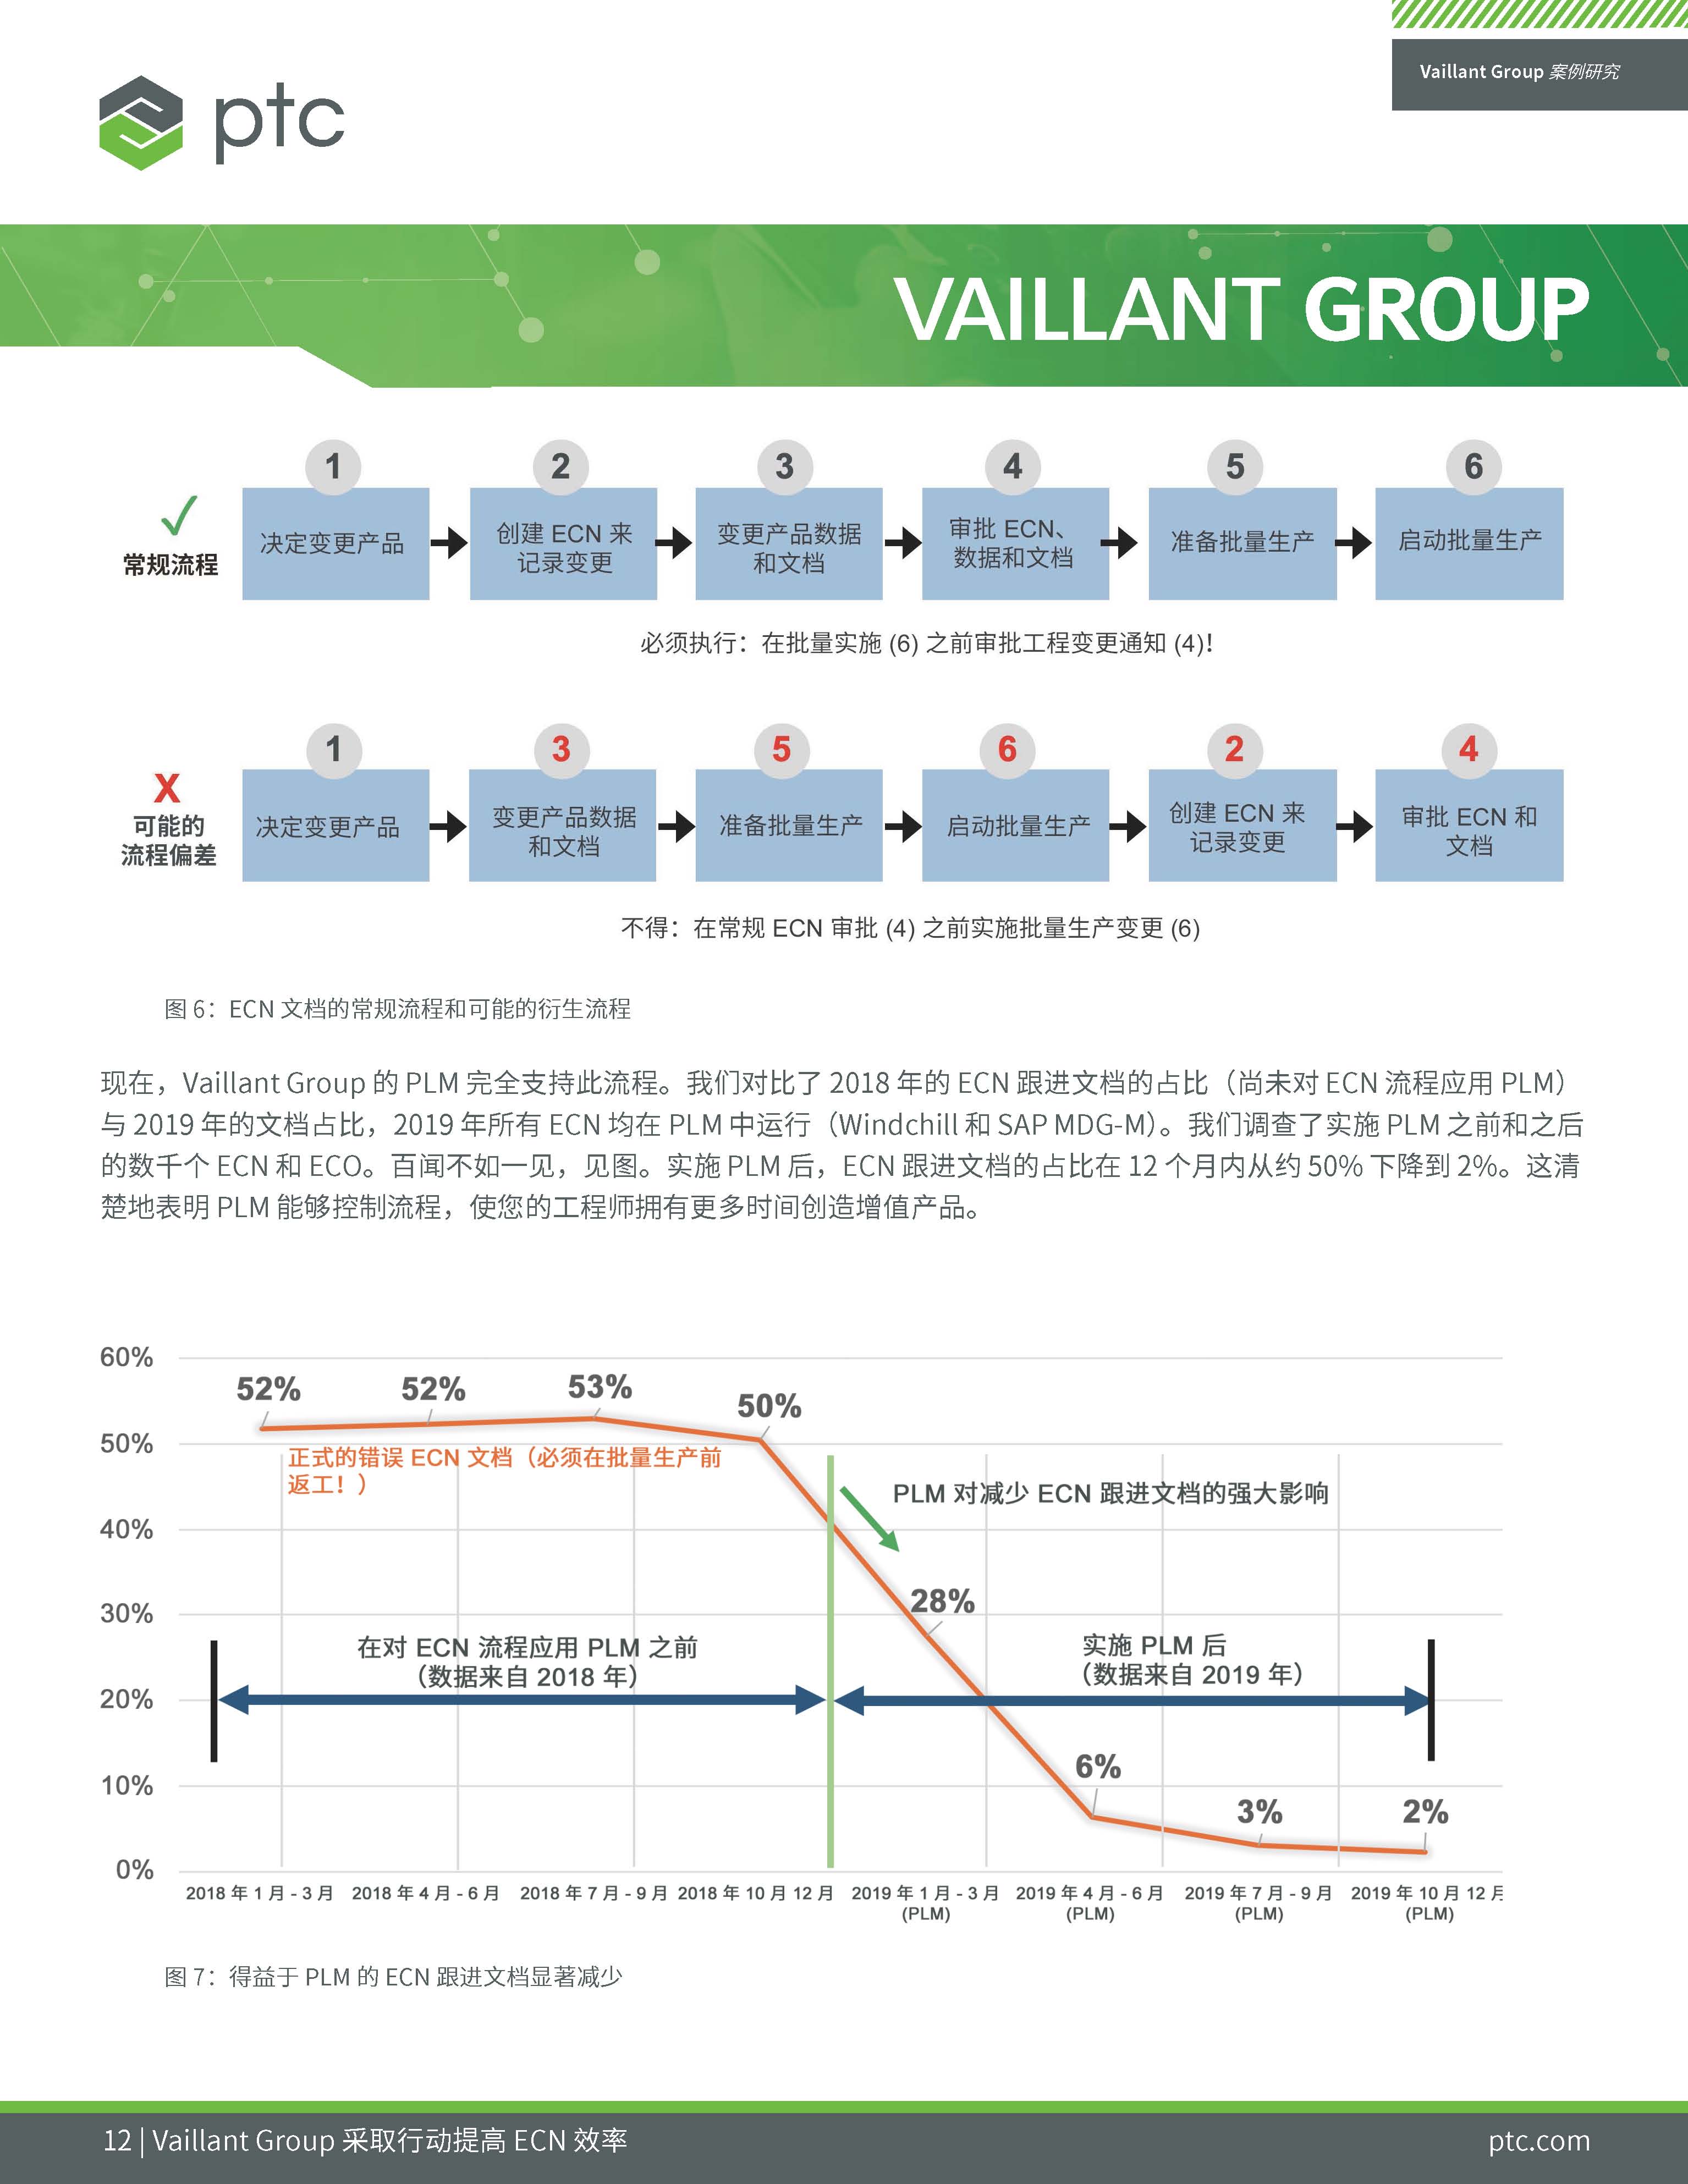 Vaillant Group's Digital Transformation (Chinese)_页面_12.jpg